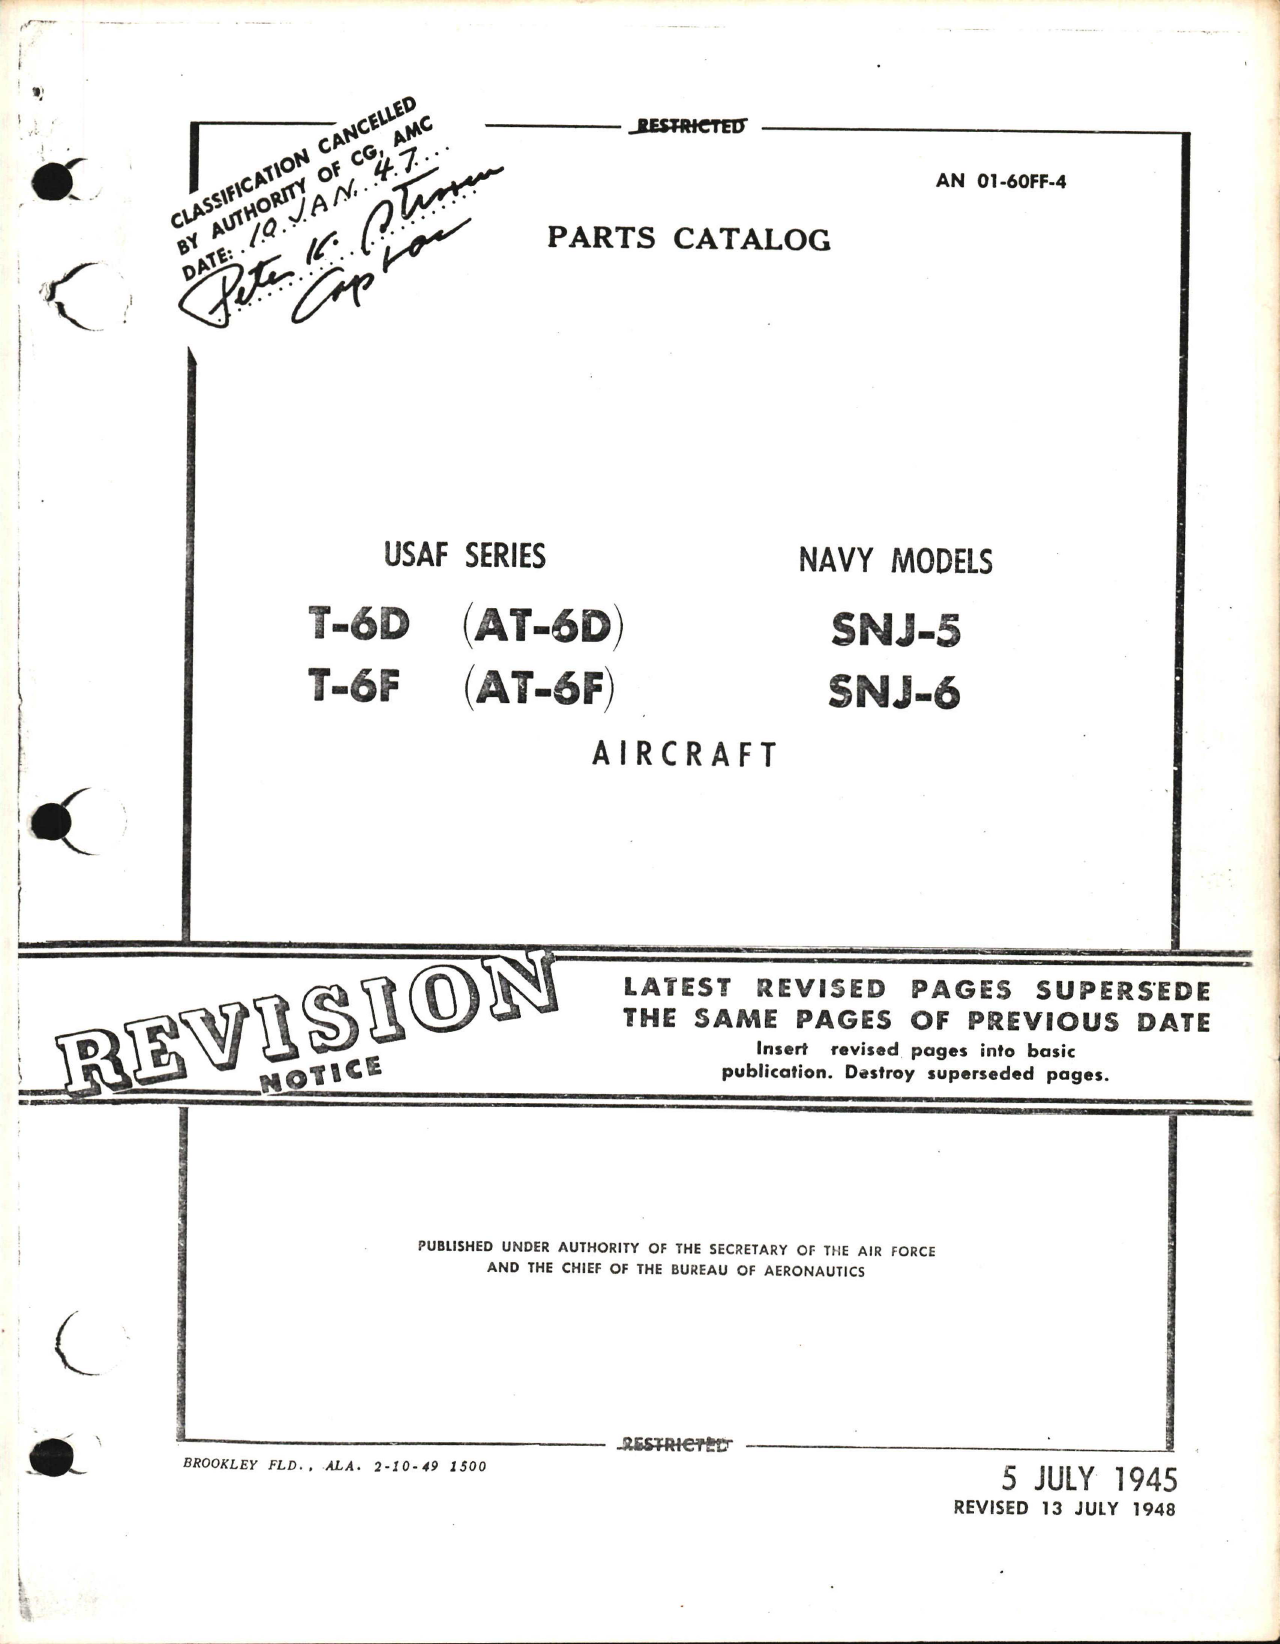 Sample page 1 from AirCorps Library document: Parts Catalog for T-6D, T-6F, AT-6D, AT-6F, SNJ-5, and SNJ-6